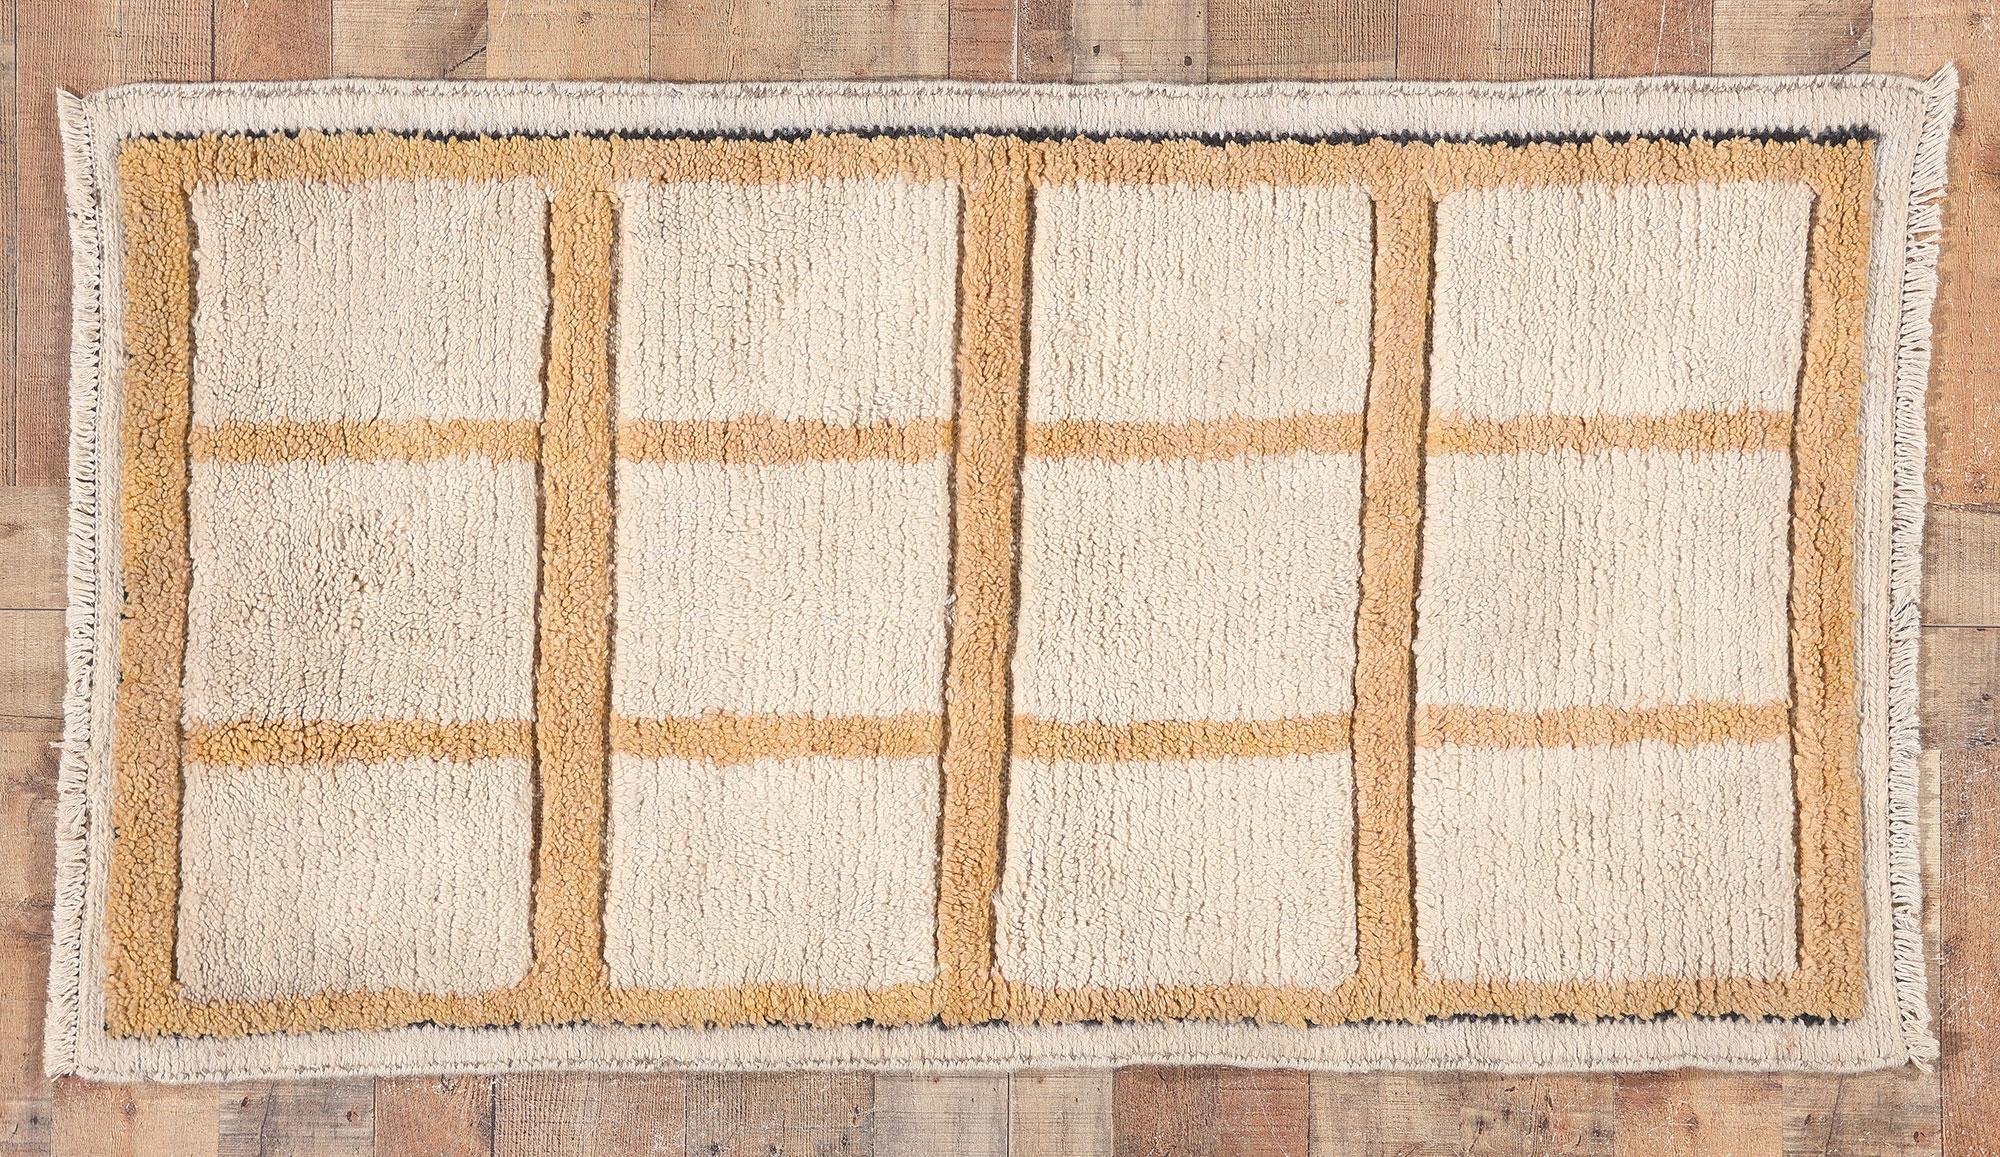 81017 Modern Moroccan Rug with Neutral Earth-Tone Colors, 02'09 x 04'11.
Displaying simplicity with incredible detail and texture, this modern Moroccan area rug provides a feeling of cozy contentment without the clutter. The checked design and